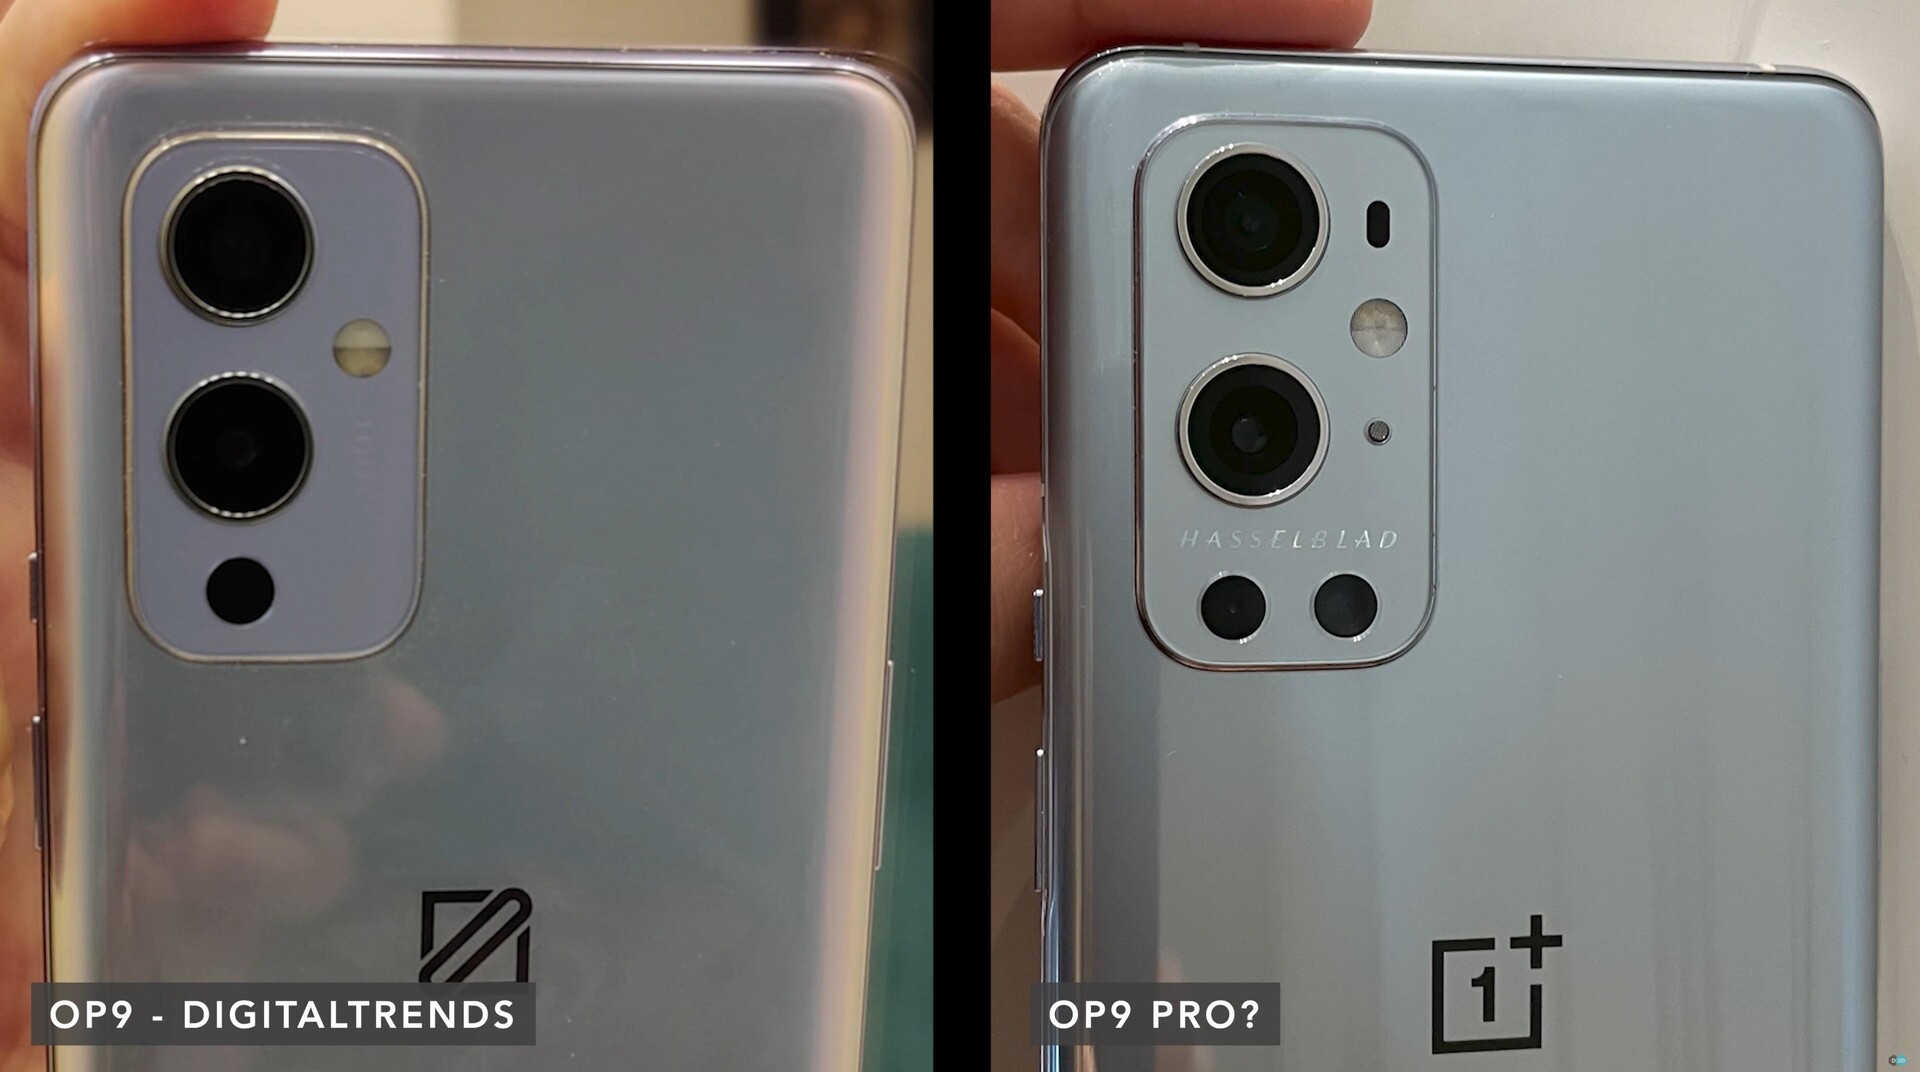 The OnePlus 9 Pro leaks back into live photos;  Hasselblad partnership and extensive camera hardware are confirmed, as well as a 120 Hz and a QHD + screen